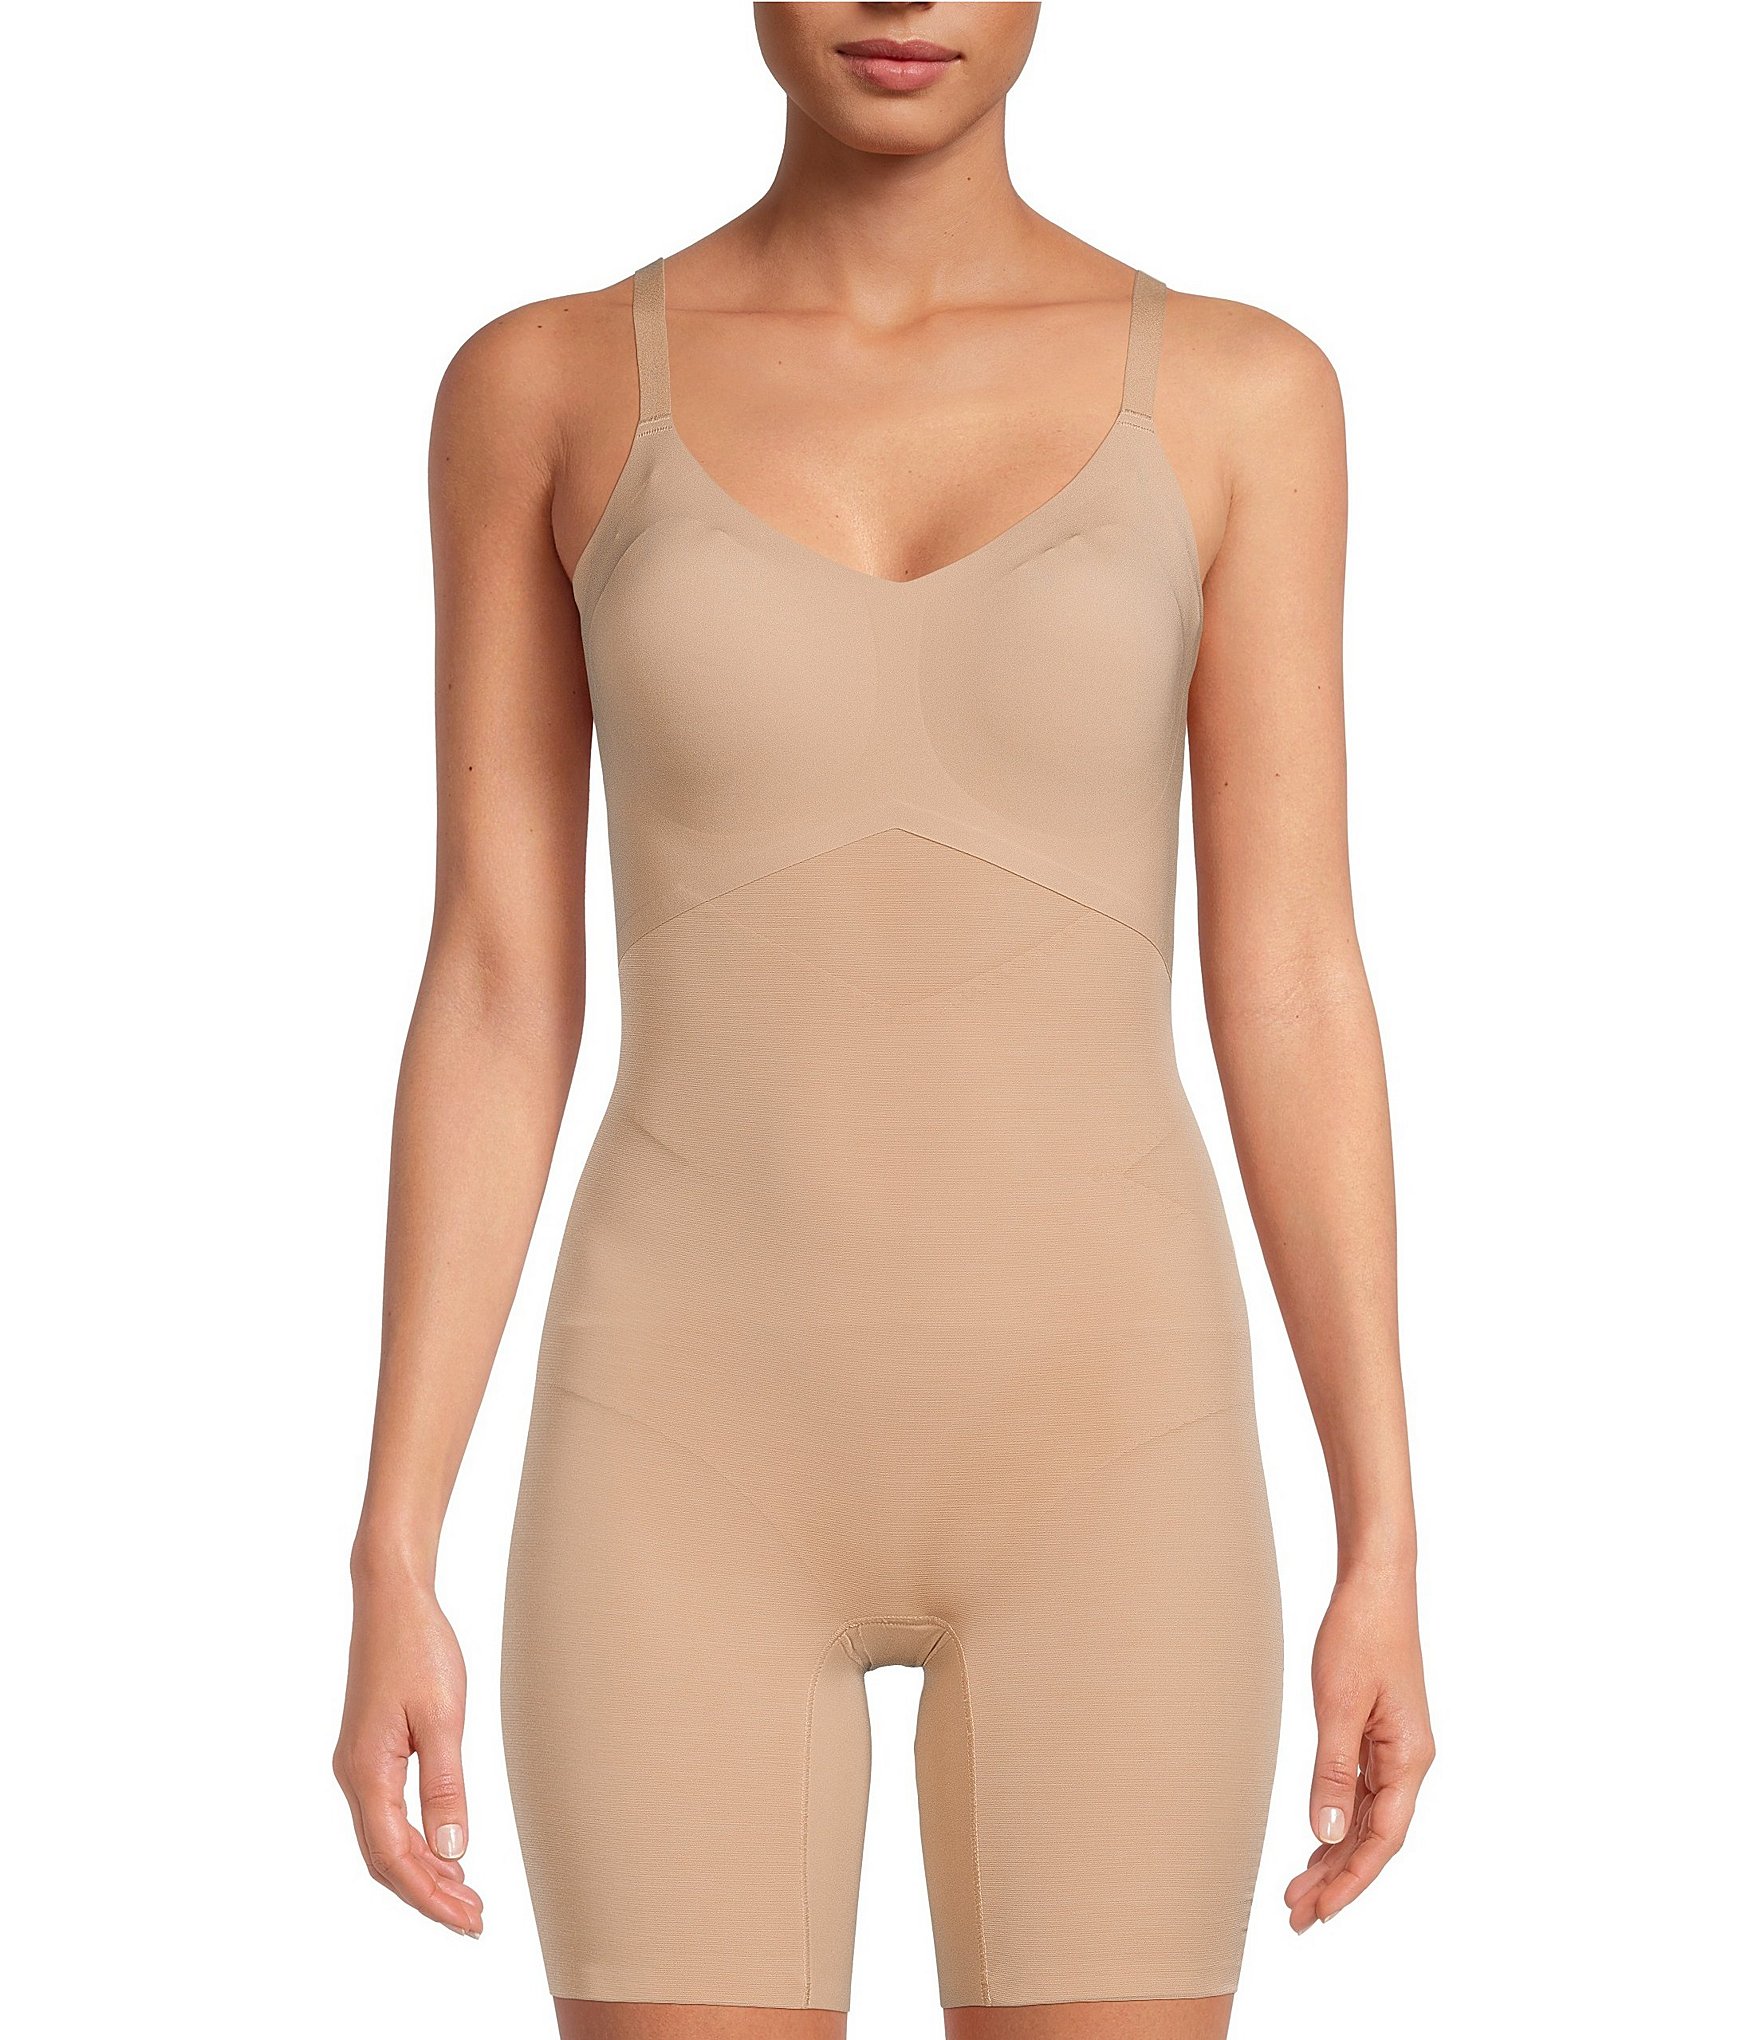 Honeylove Mid-Thigh‎ Bodysuit size 2X - $72 - From Eunice